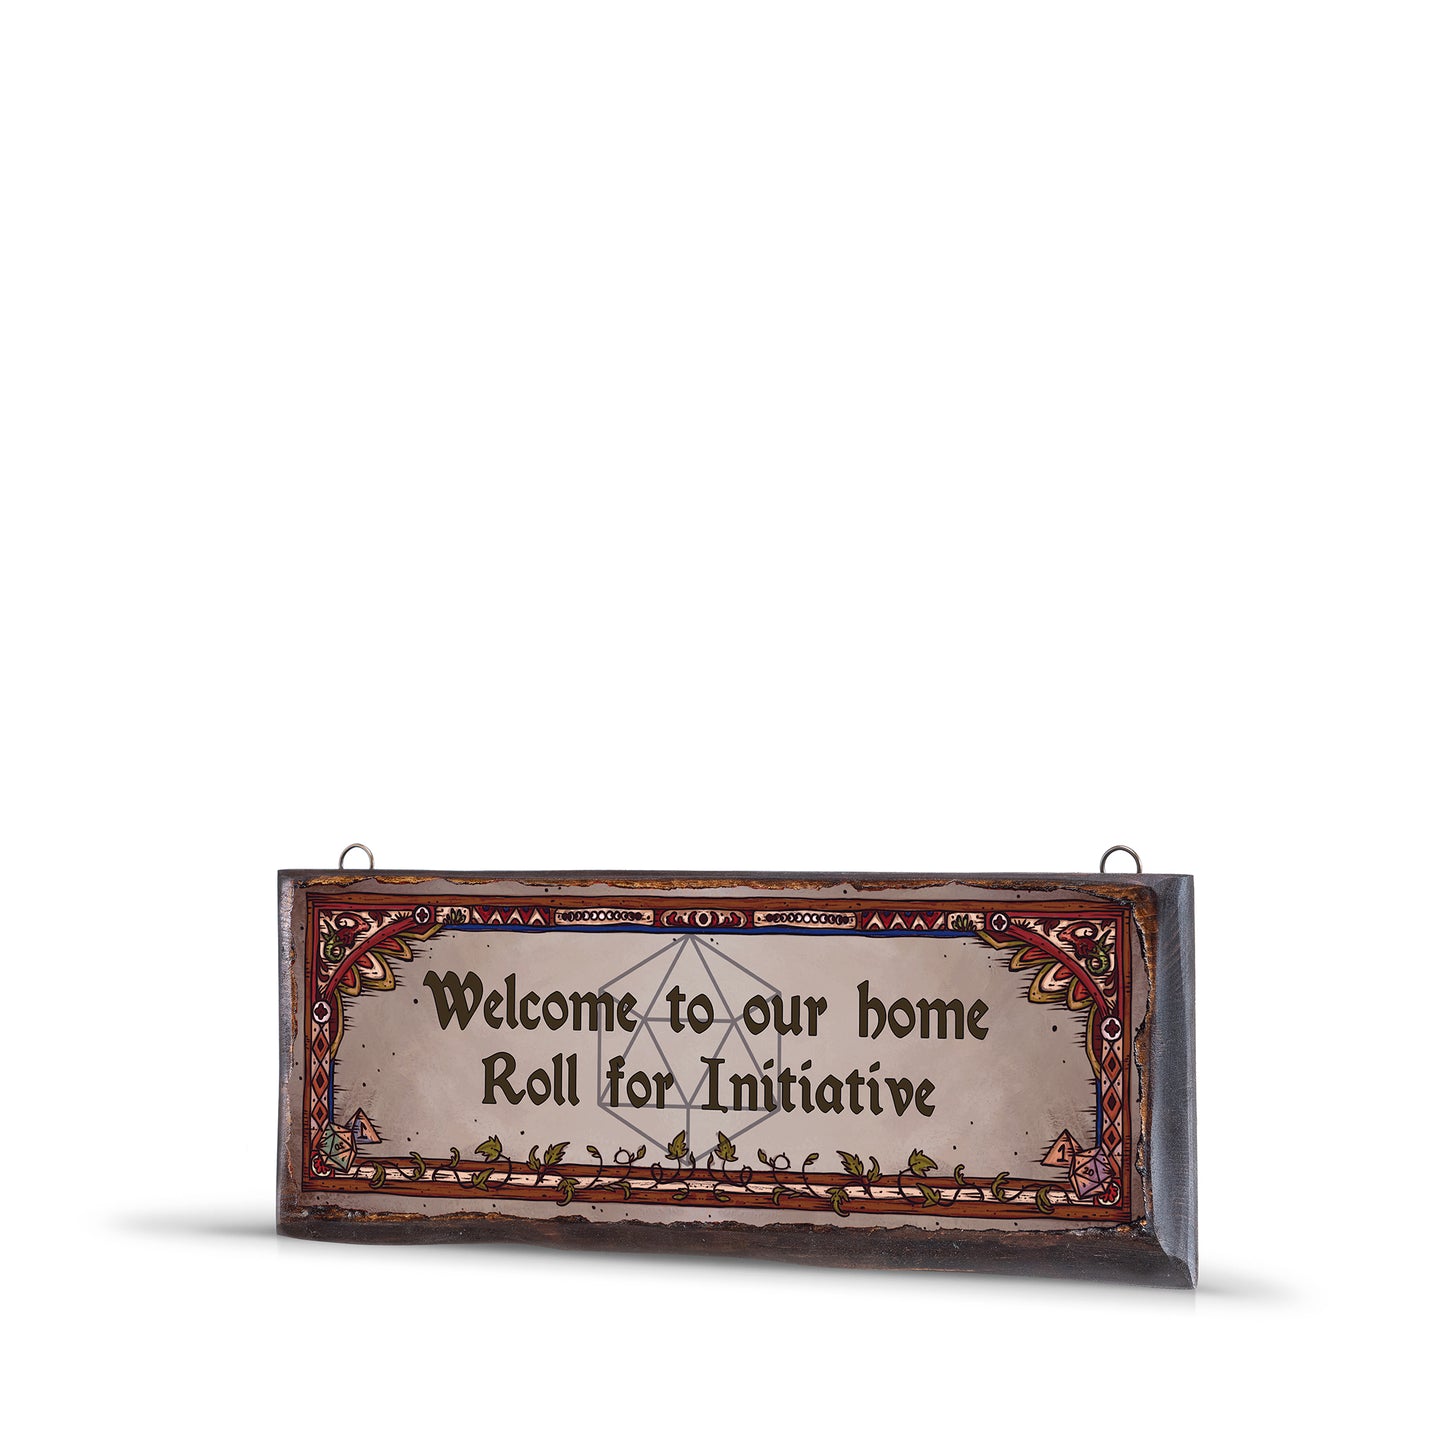 WELCOME TO OUR HOME ROLL FOR INITIATIVE WOODEN SIGN - WS028